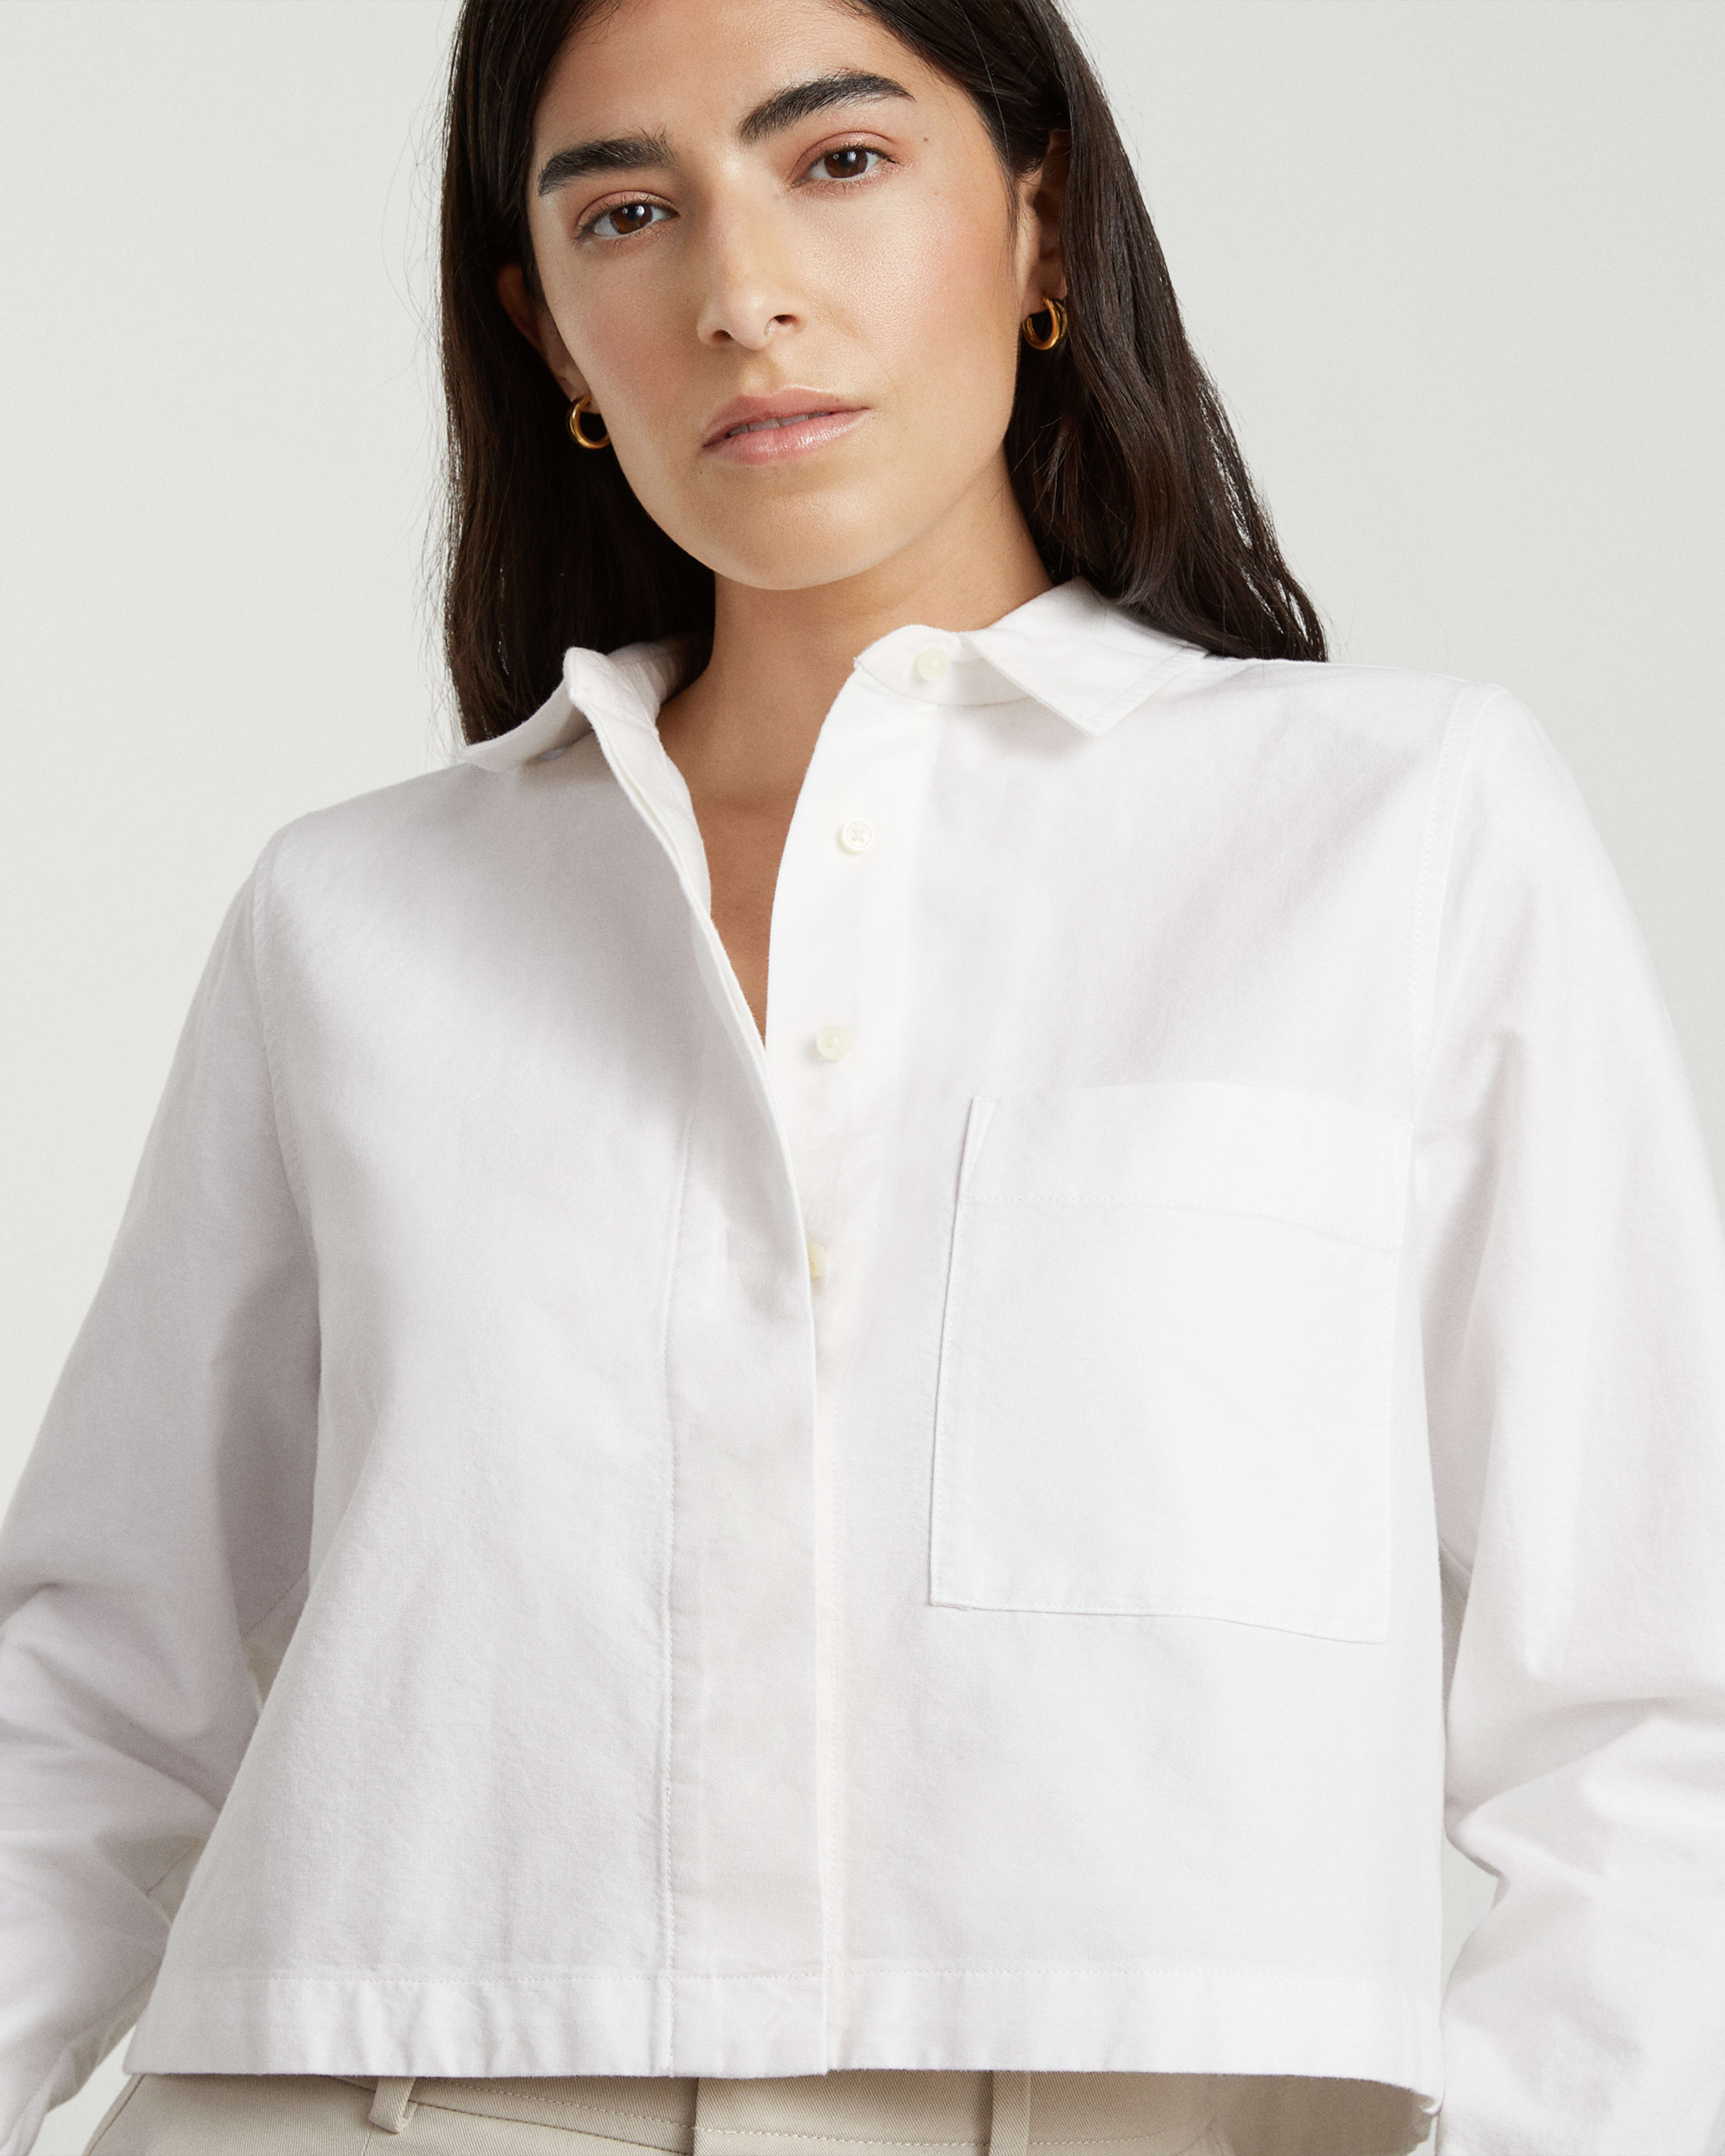 The Cropped Oxford White – Everlane